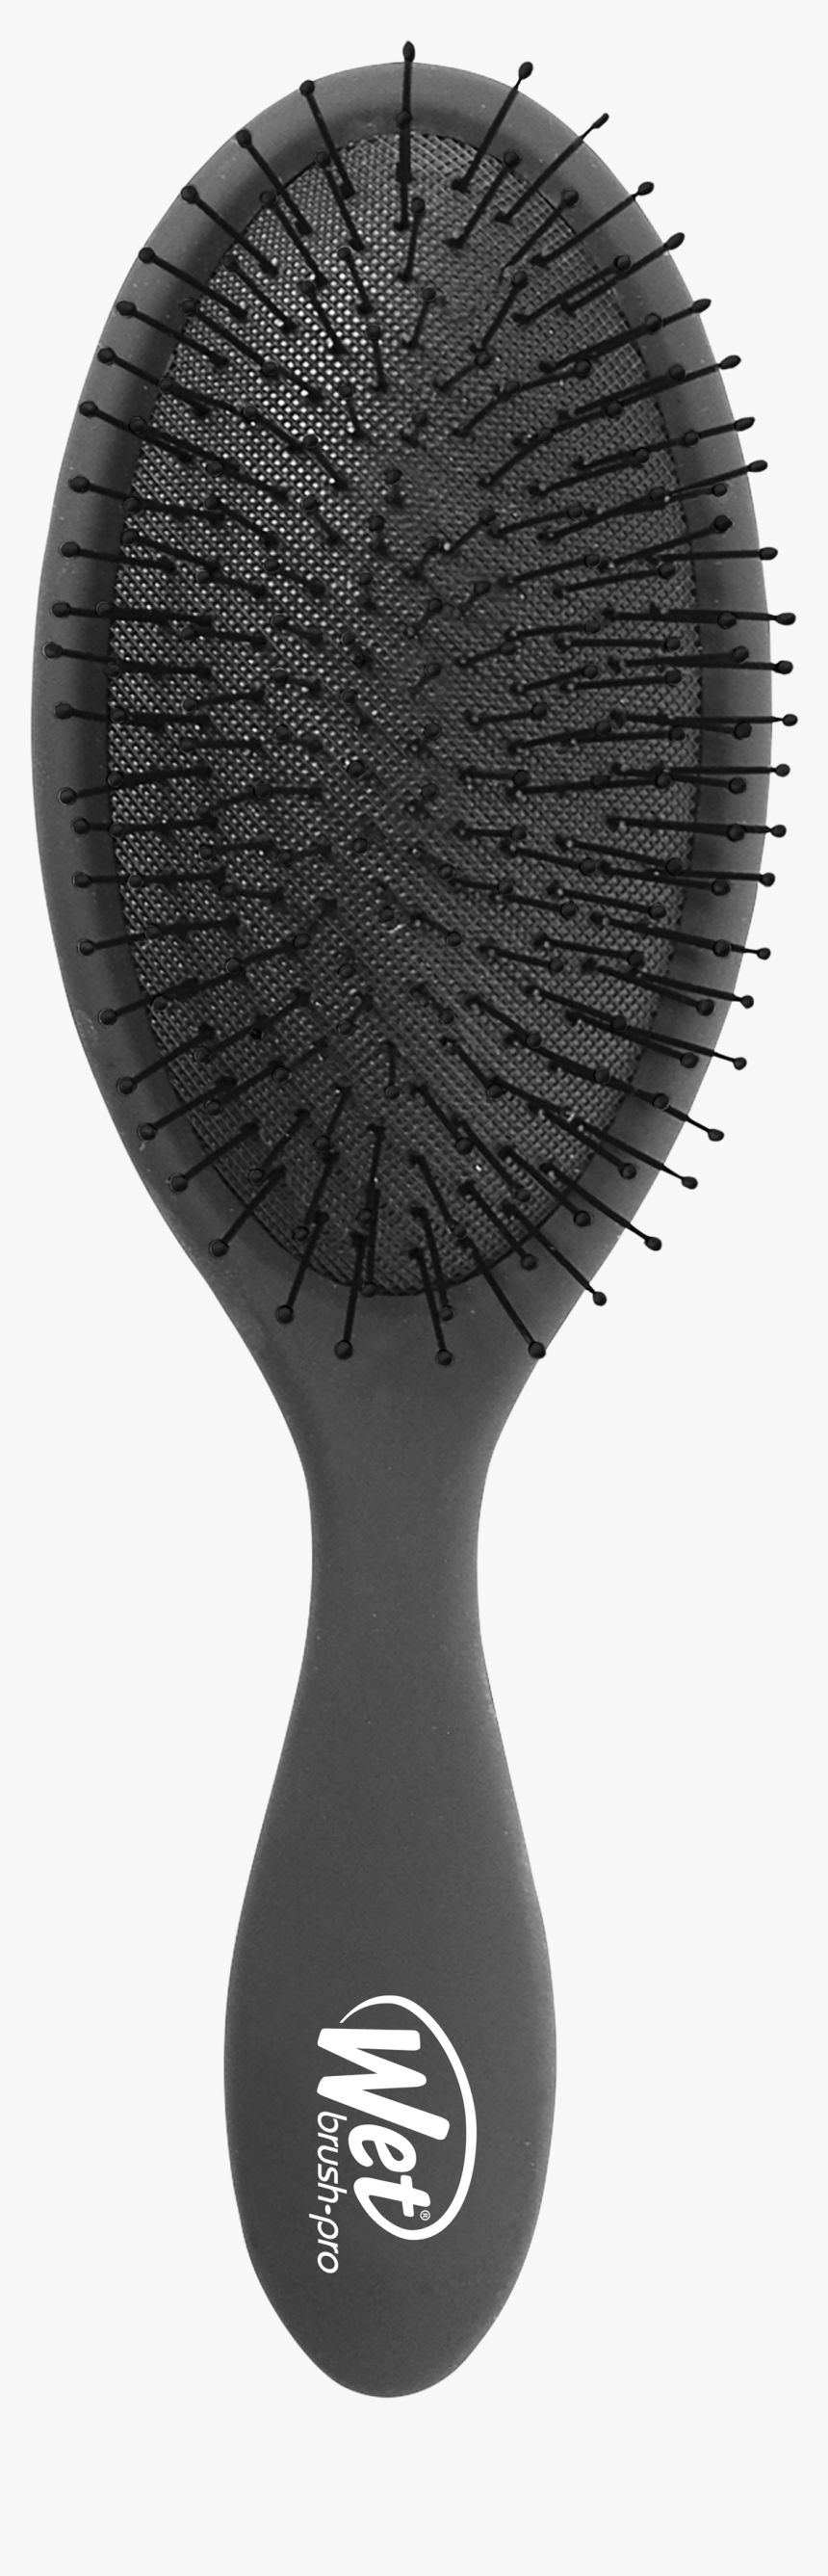 Hairbrush Png - Wet And Dry Hair